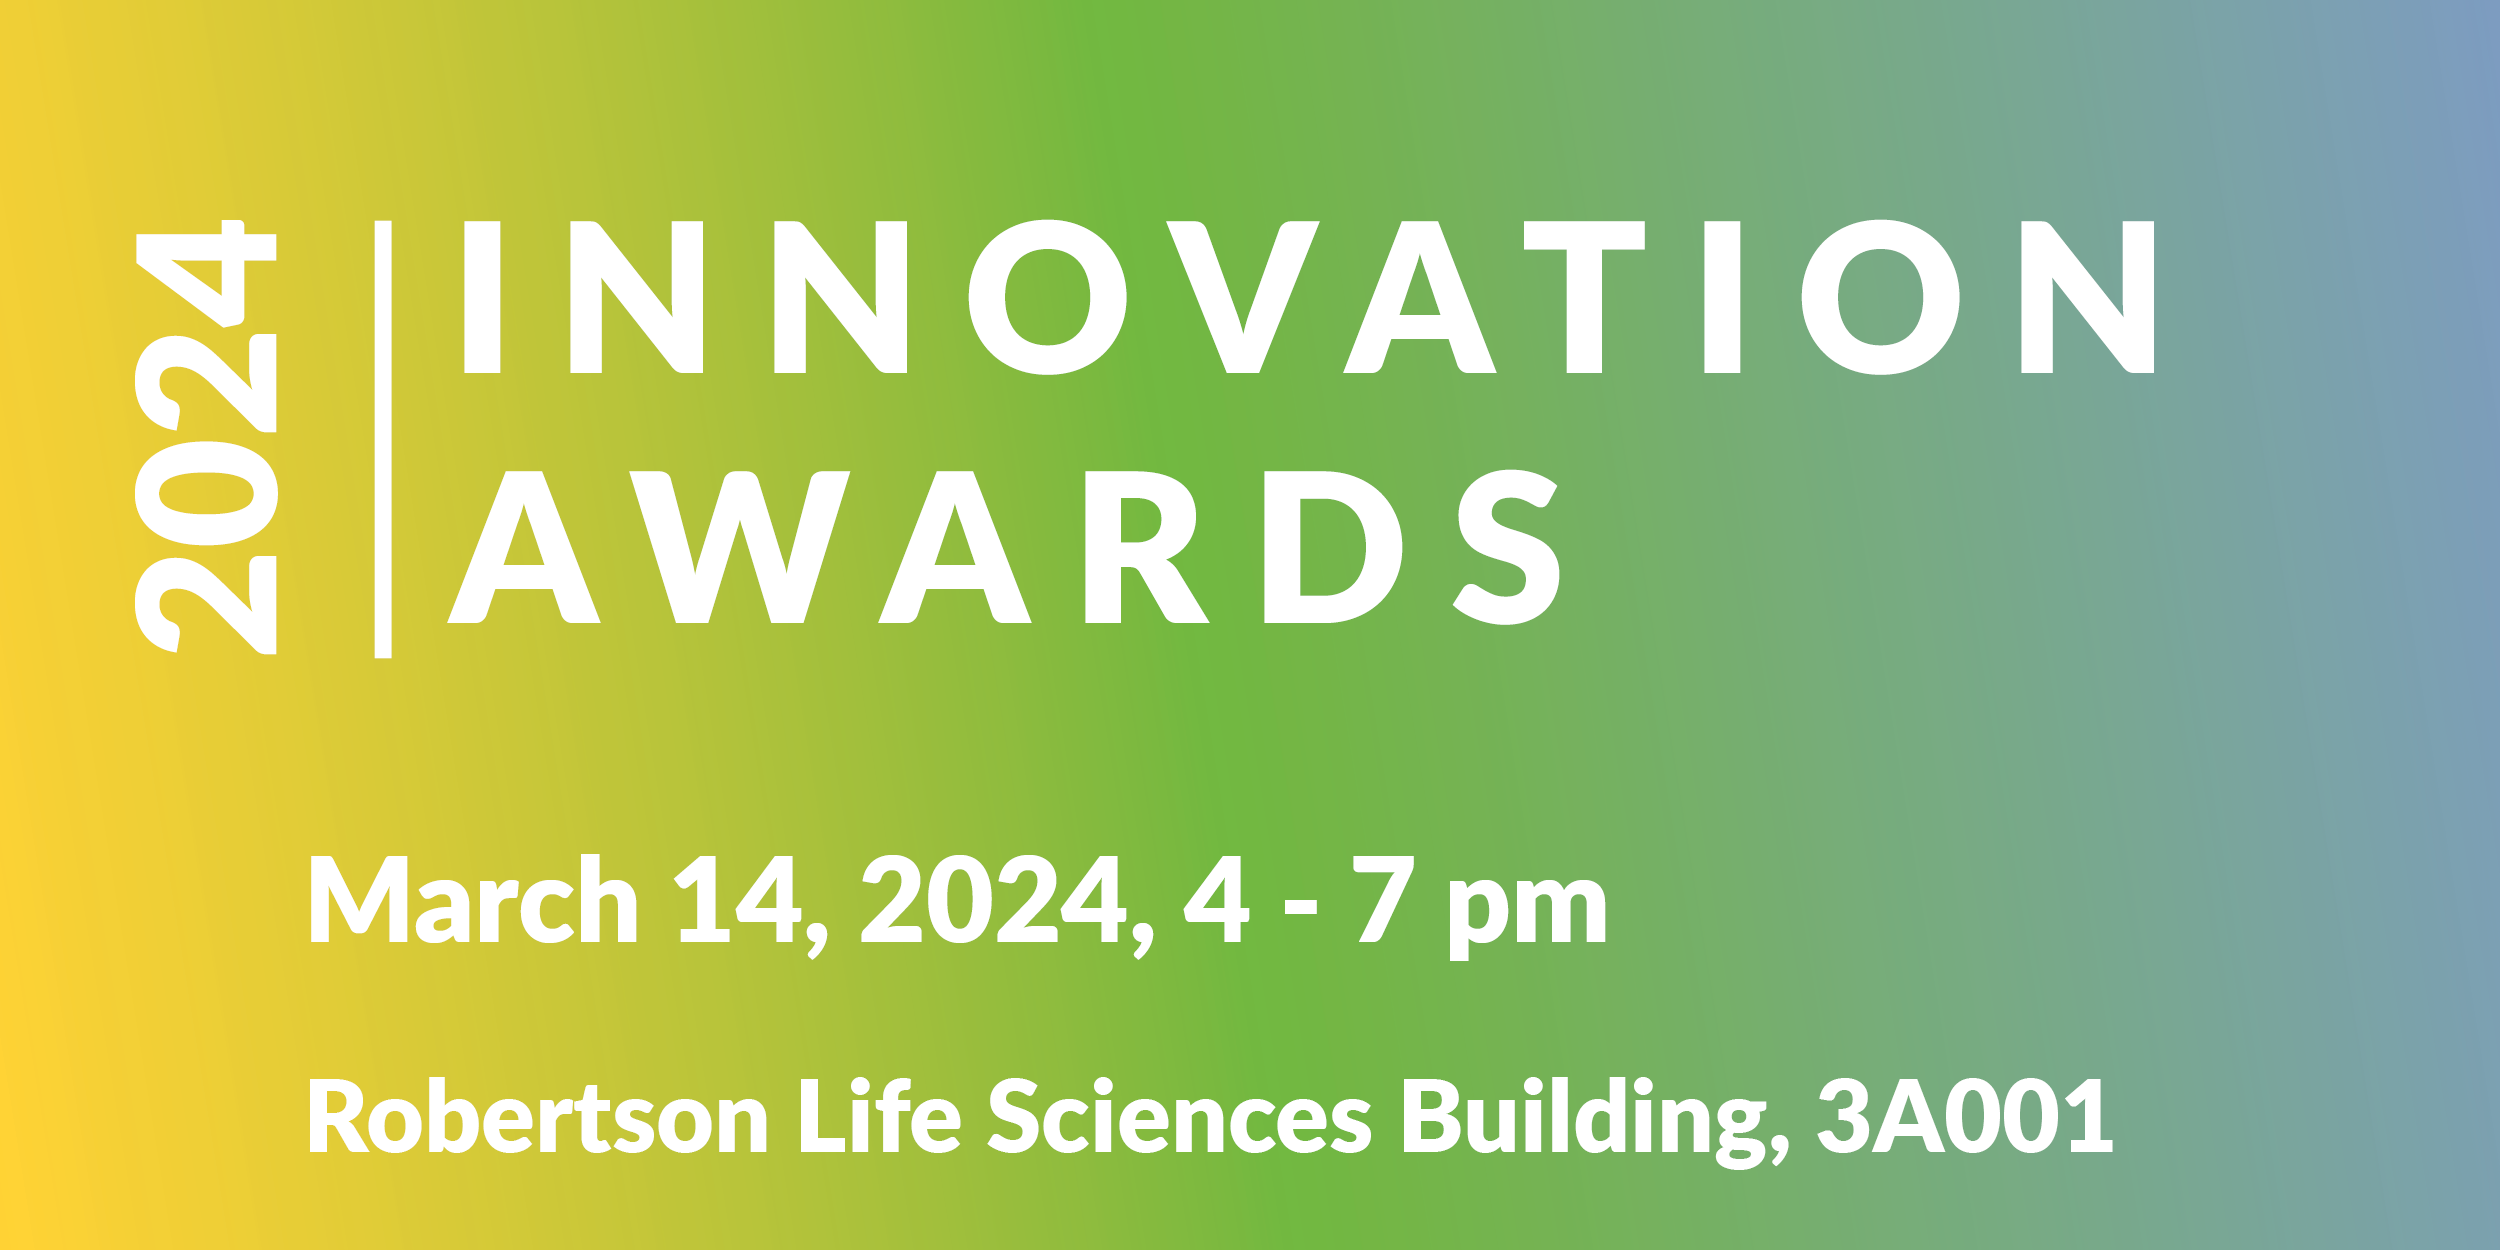 2024 Innovation Awards - March 14, 2024, 4-7 pm, Robertson Life Sciences Building, 3A001